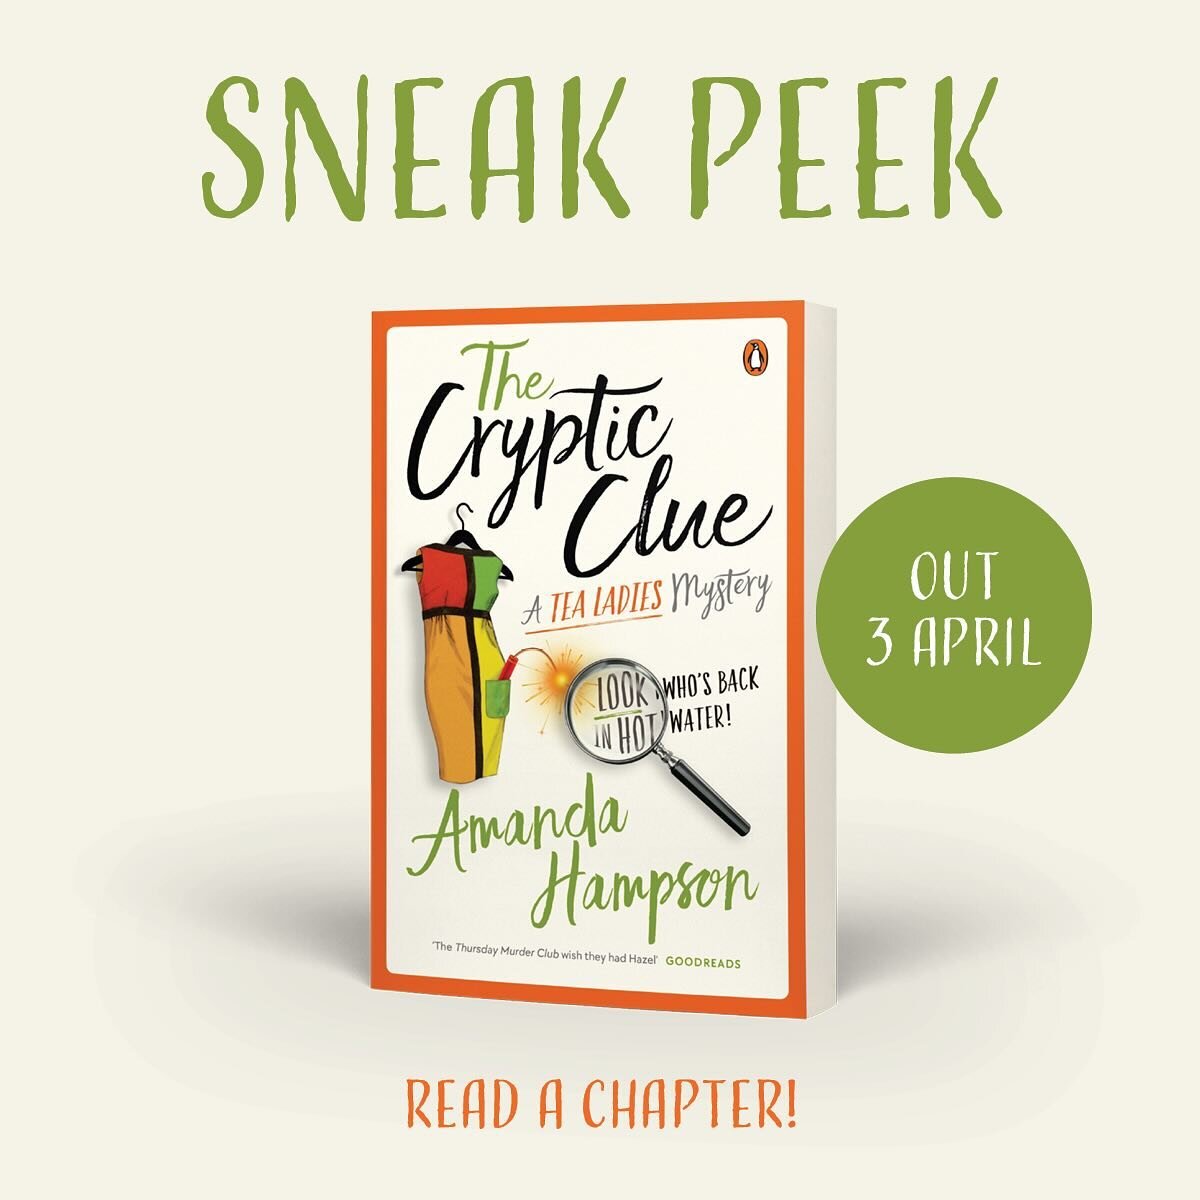 Happy Sneak Peek Day! @penguinbooksaus have now released the first chapter of The Cryptic Clue for your reading pleasure. See Link in Bio.
https://www.penguin.com.au/books/the-cryptic-clue-9781761341021/extracts/3028-the-cryptic-clue